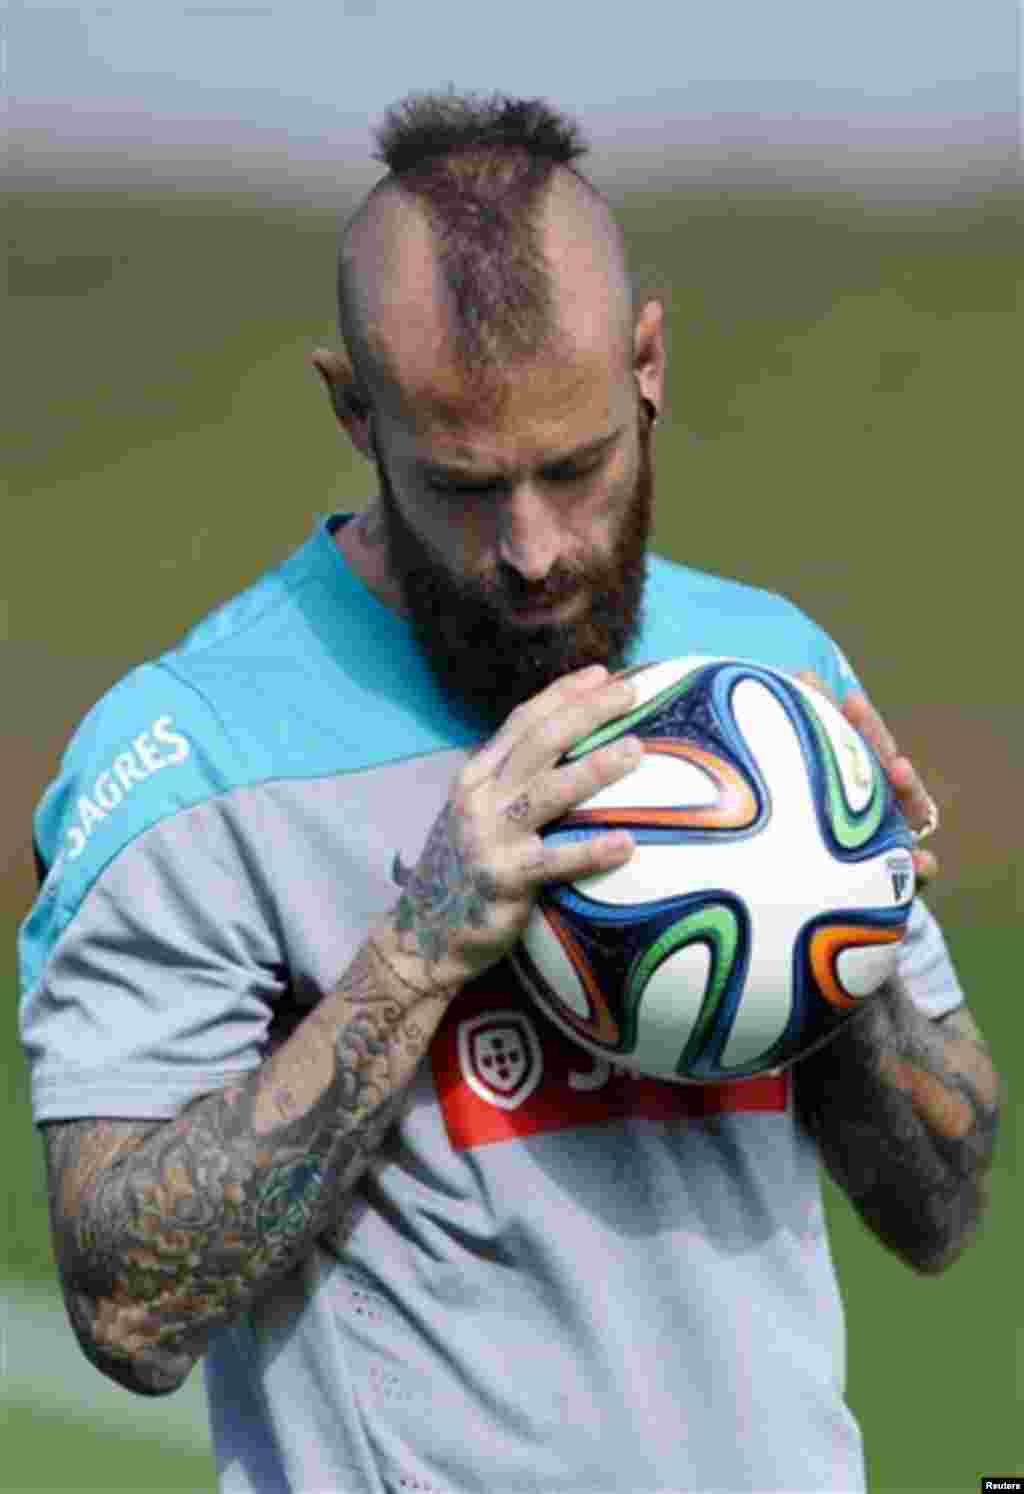 Raul Meireles grabs the ball during a training session of Portugal in Campinas, Brazil, Thursday, June 19, 2014. Portugal plays in group G of the Brazil 2014 soccer World Cup. (AP Photo/Paulo Duarte)